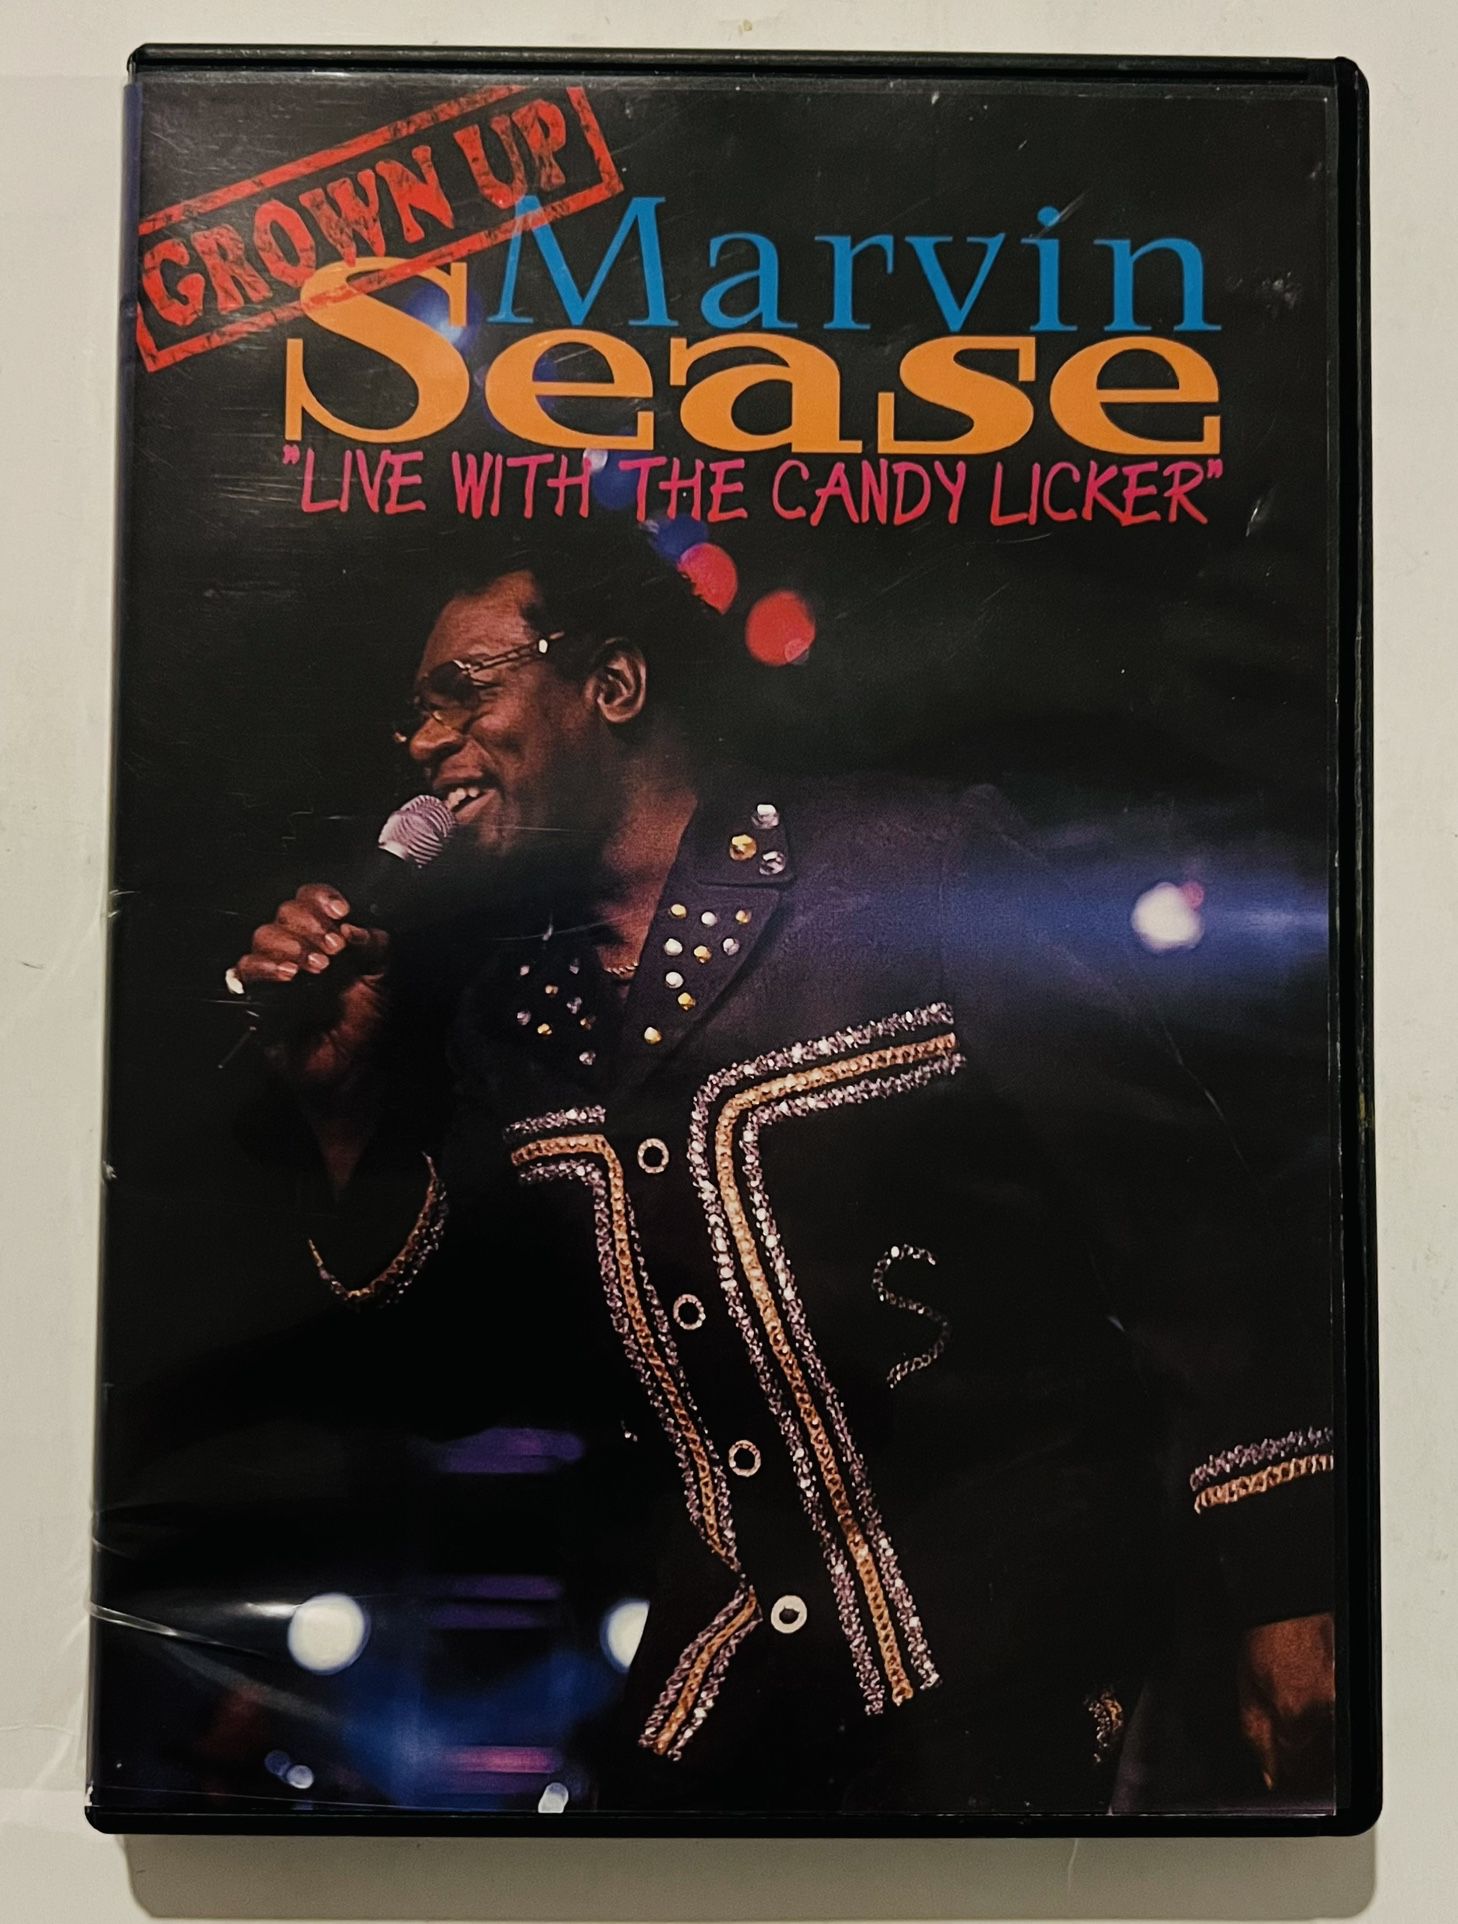 Grown Up - Live With The Candy Licker - Marvin Sease (2005, DVD)